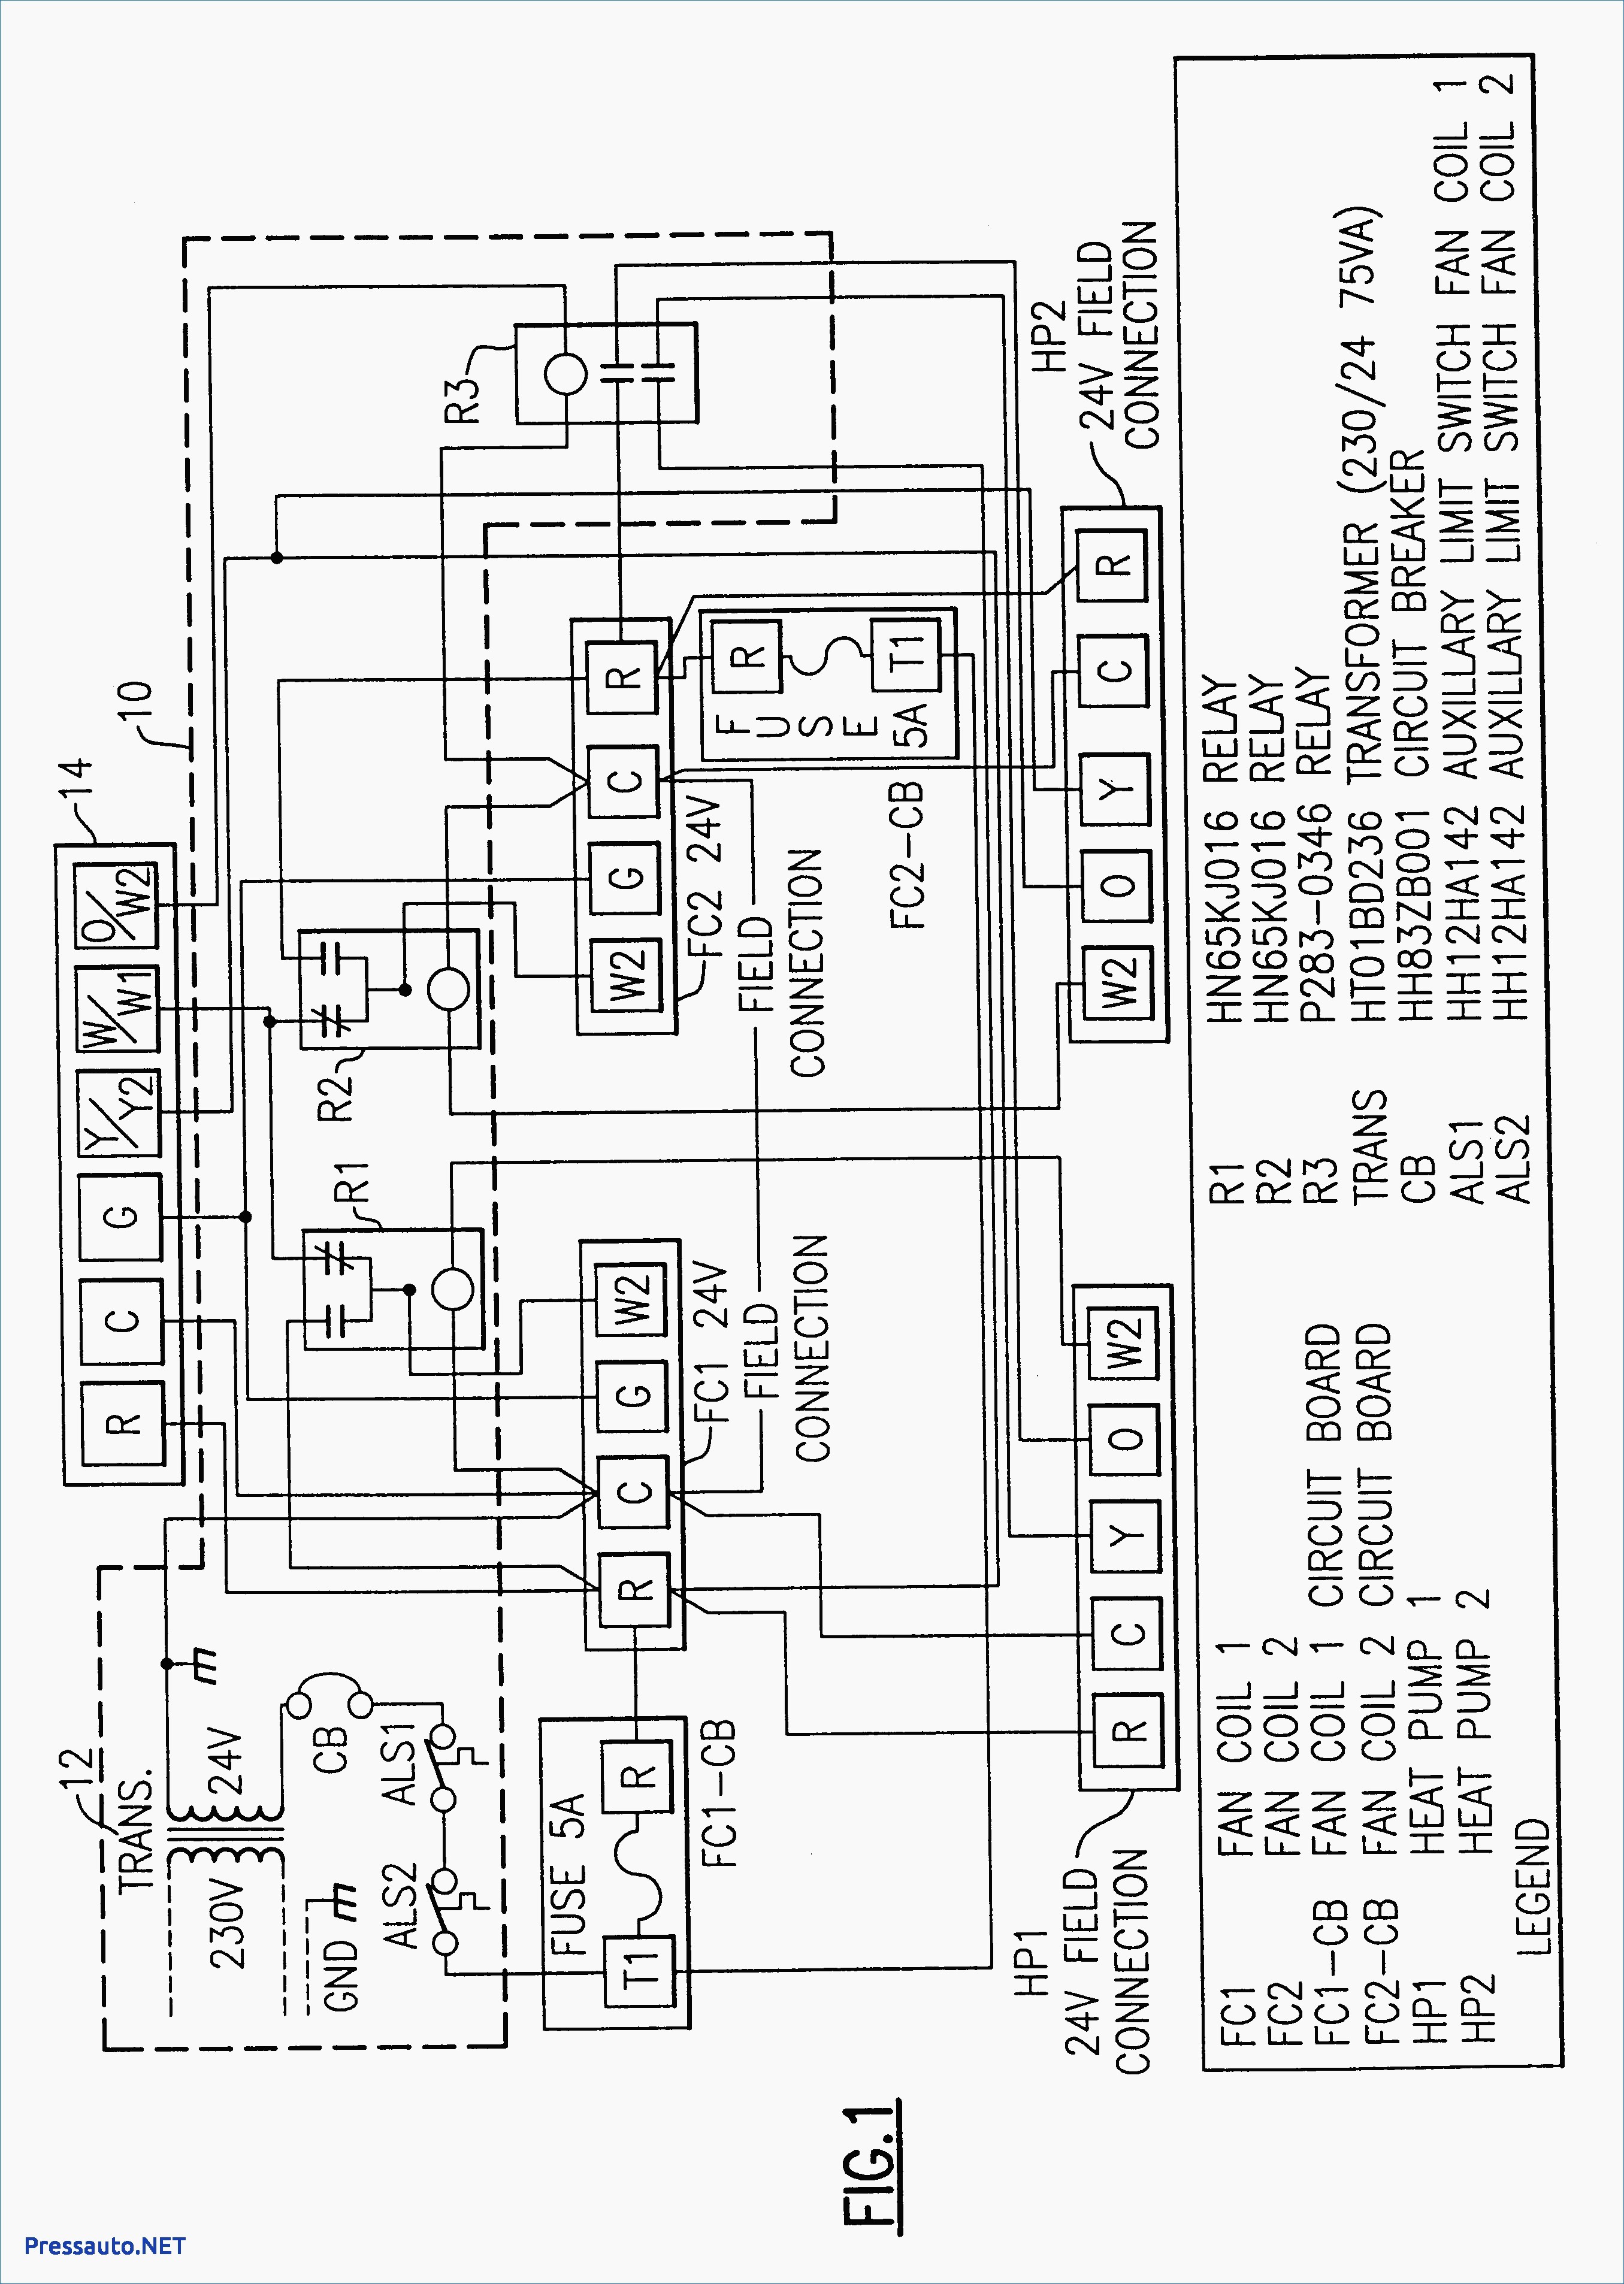 Honeywell Fan Limit Switch Wiring Diagram Fresh Honeywell Limit Switch Wiring Diagram Shrutiradio Snap Adorable